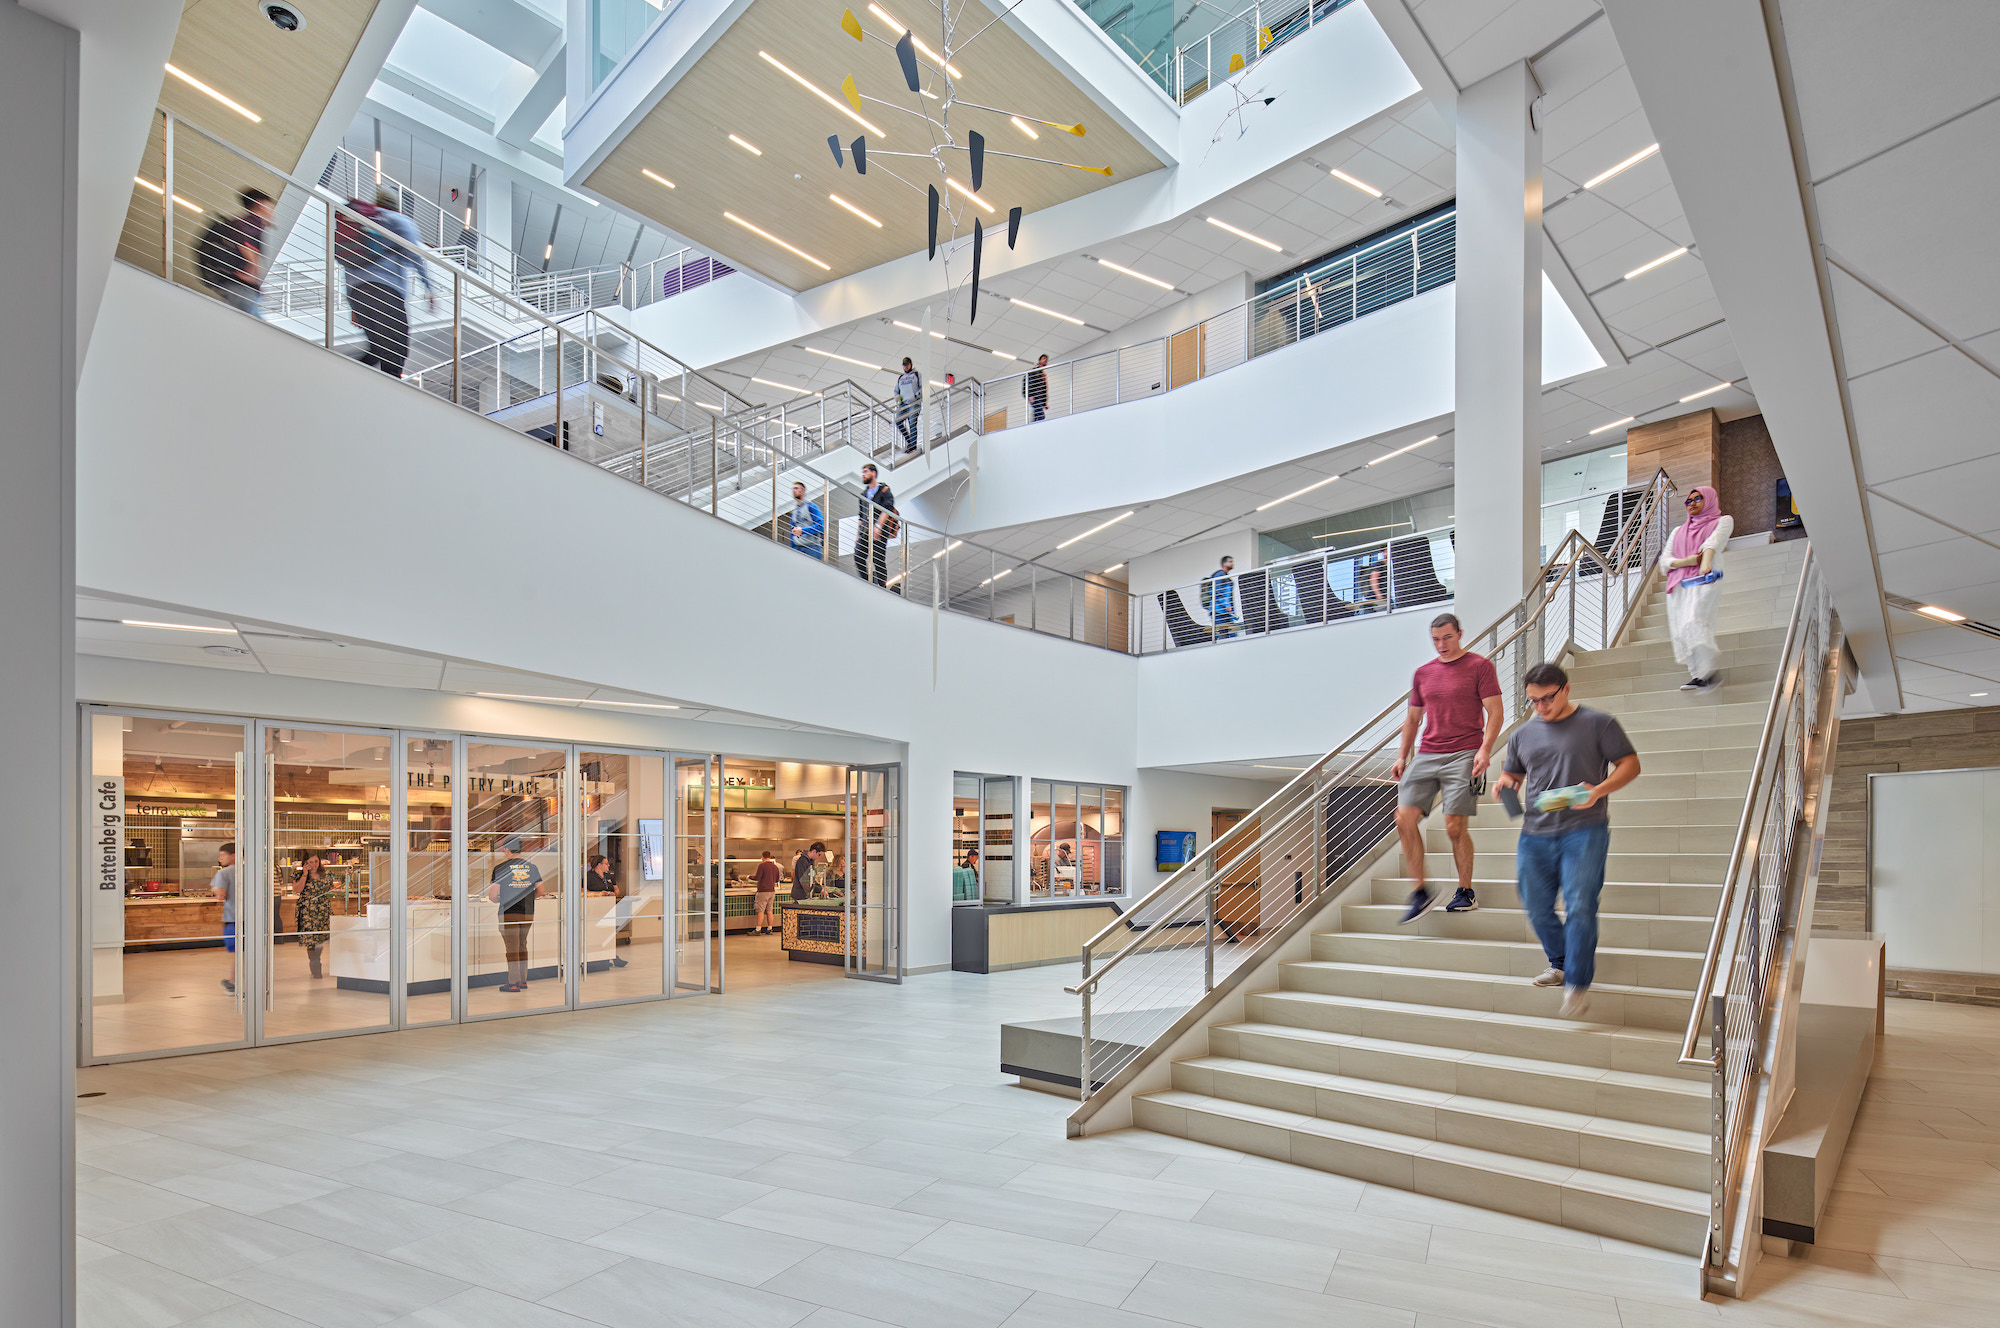 Kettering University Learning Commons designed by Stantec, Jason Keen Photography 3.jpeg